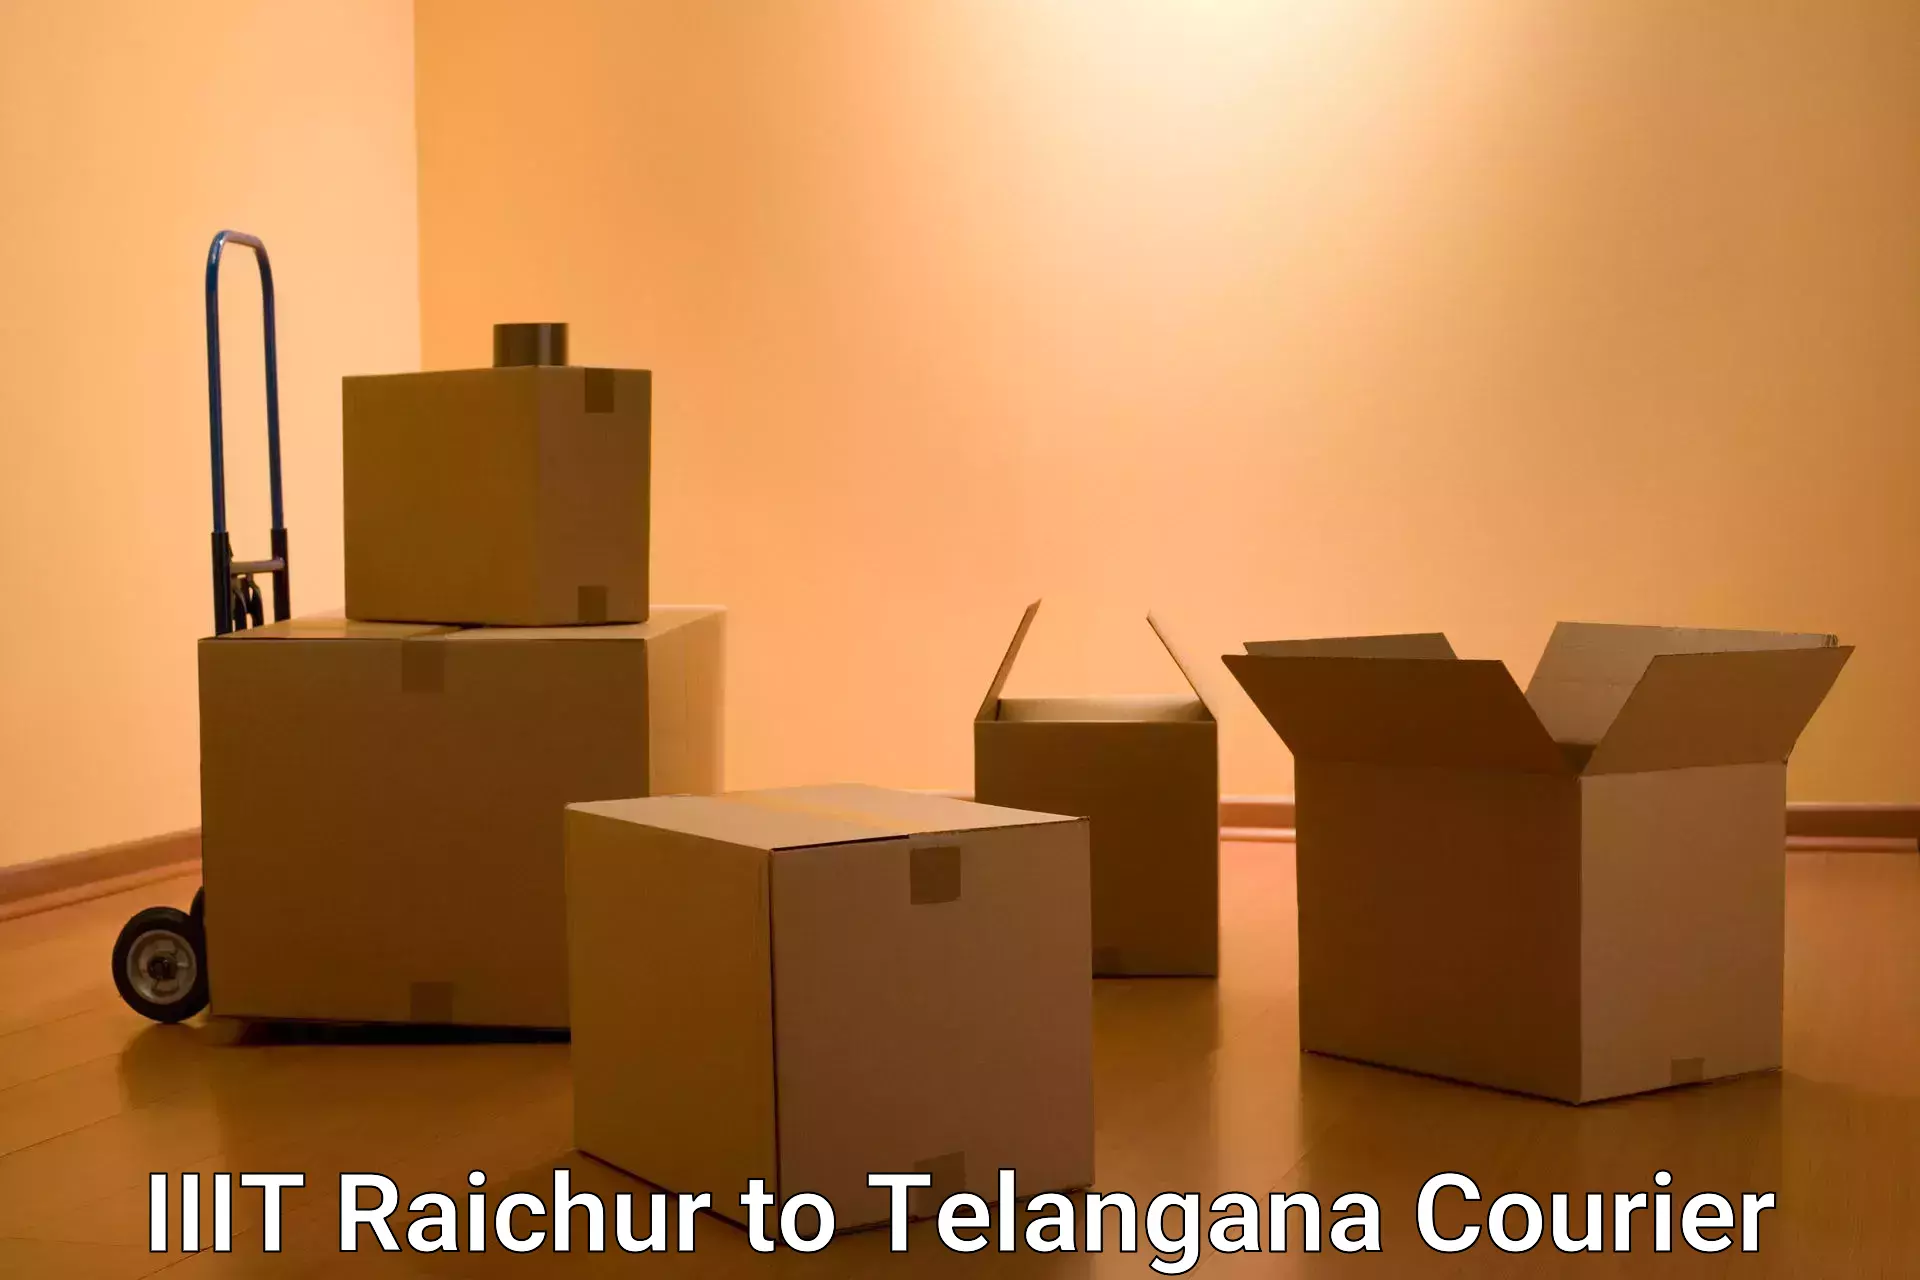 Global courier networks IIIT Raichur to Secunderabad